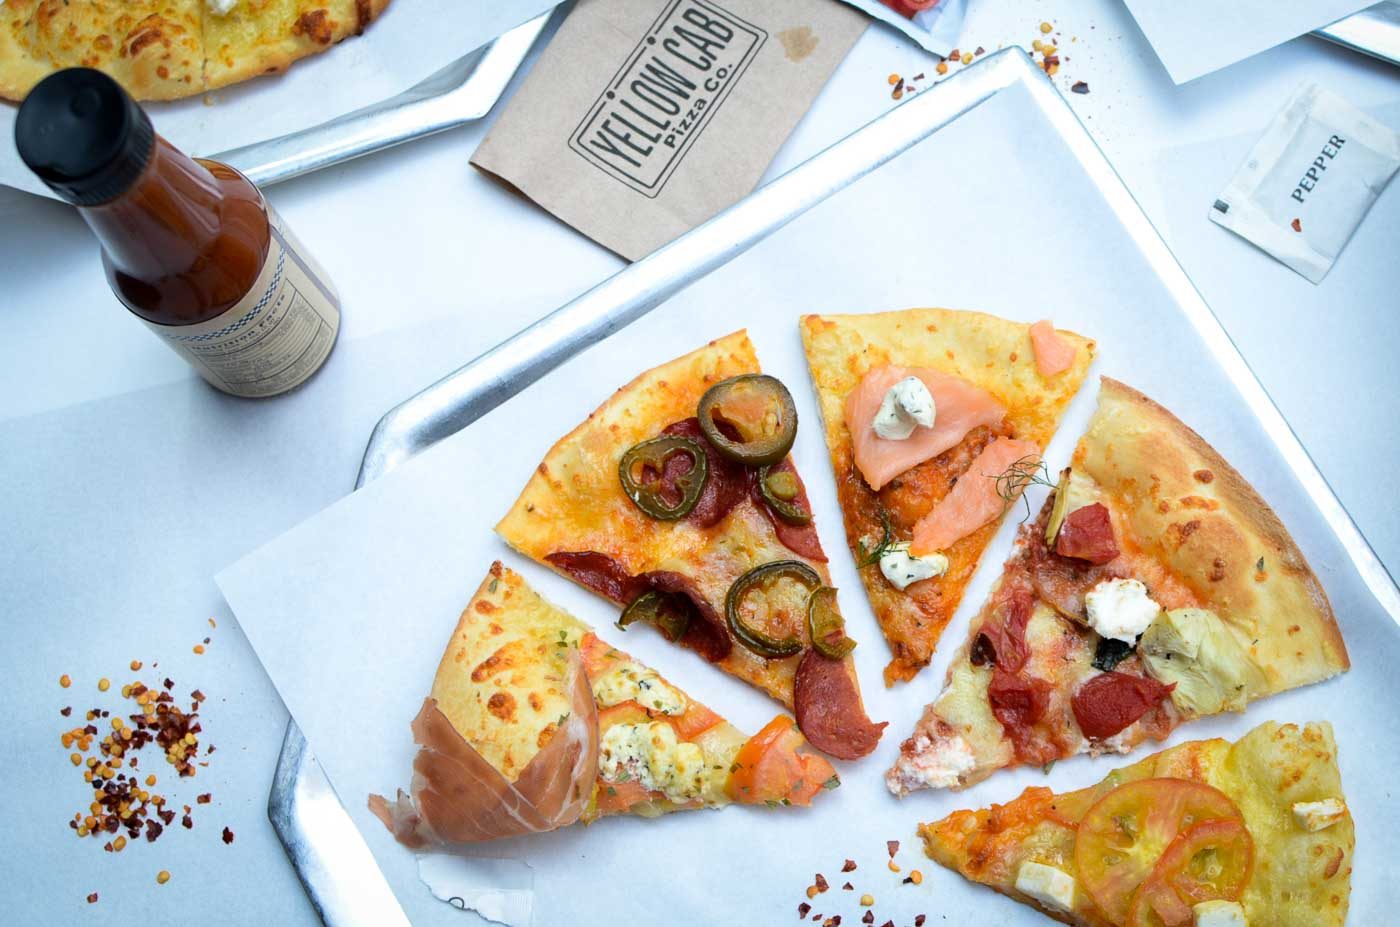 IN PHOTOS: Yellow Cab’s 5 new craft pizzas, chicken dish